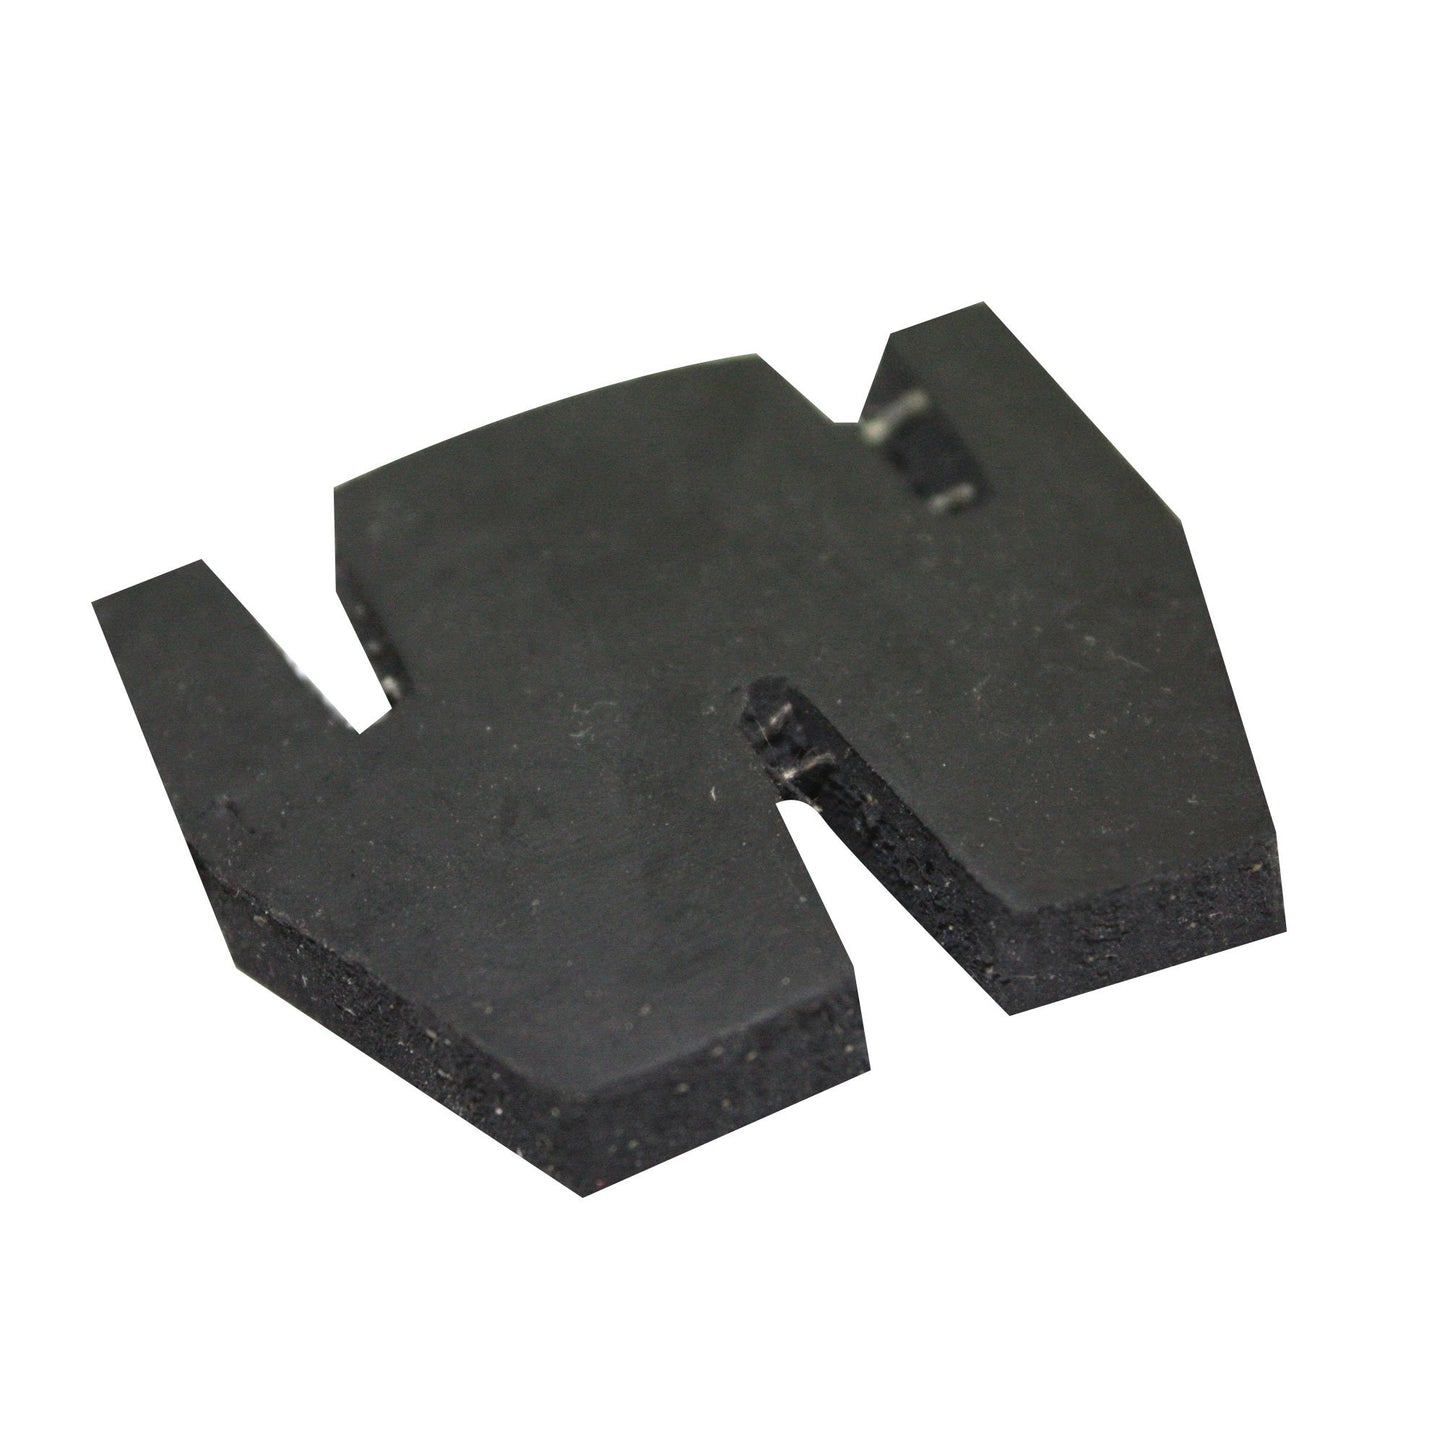 Laser Centreboard Friction Pad (ILCA)